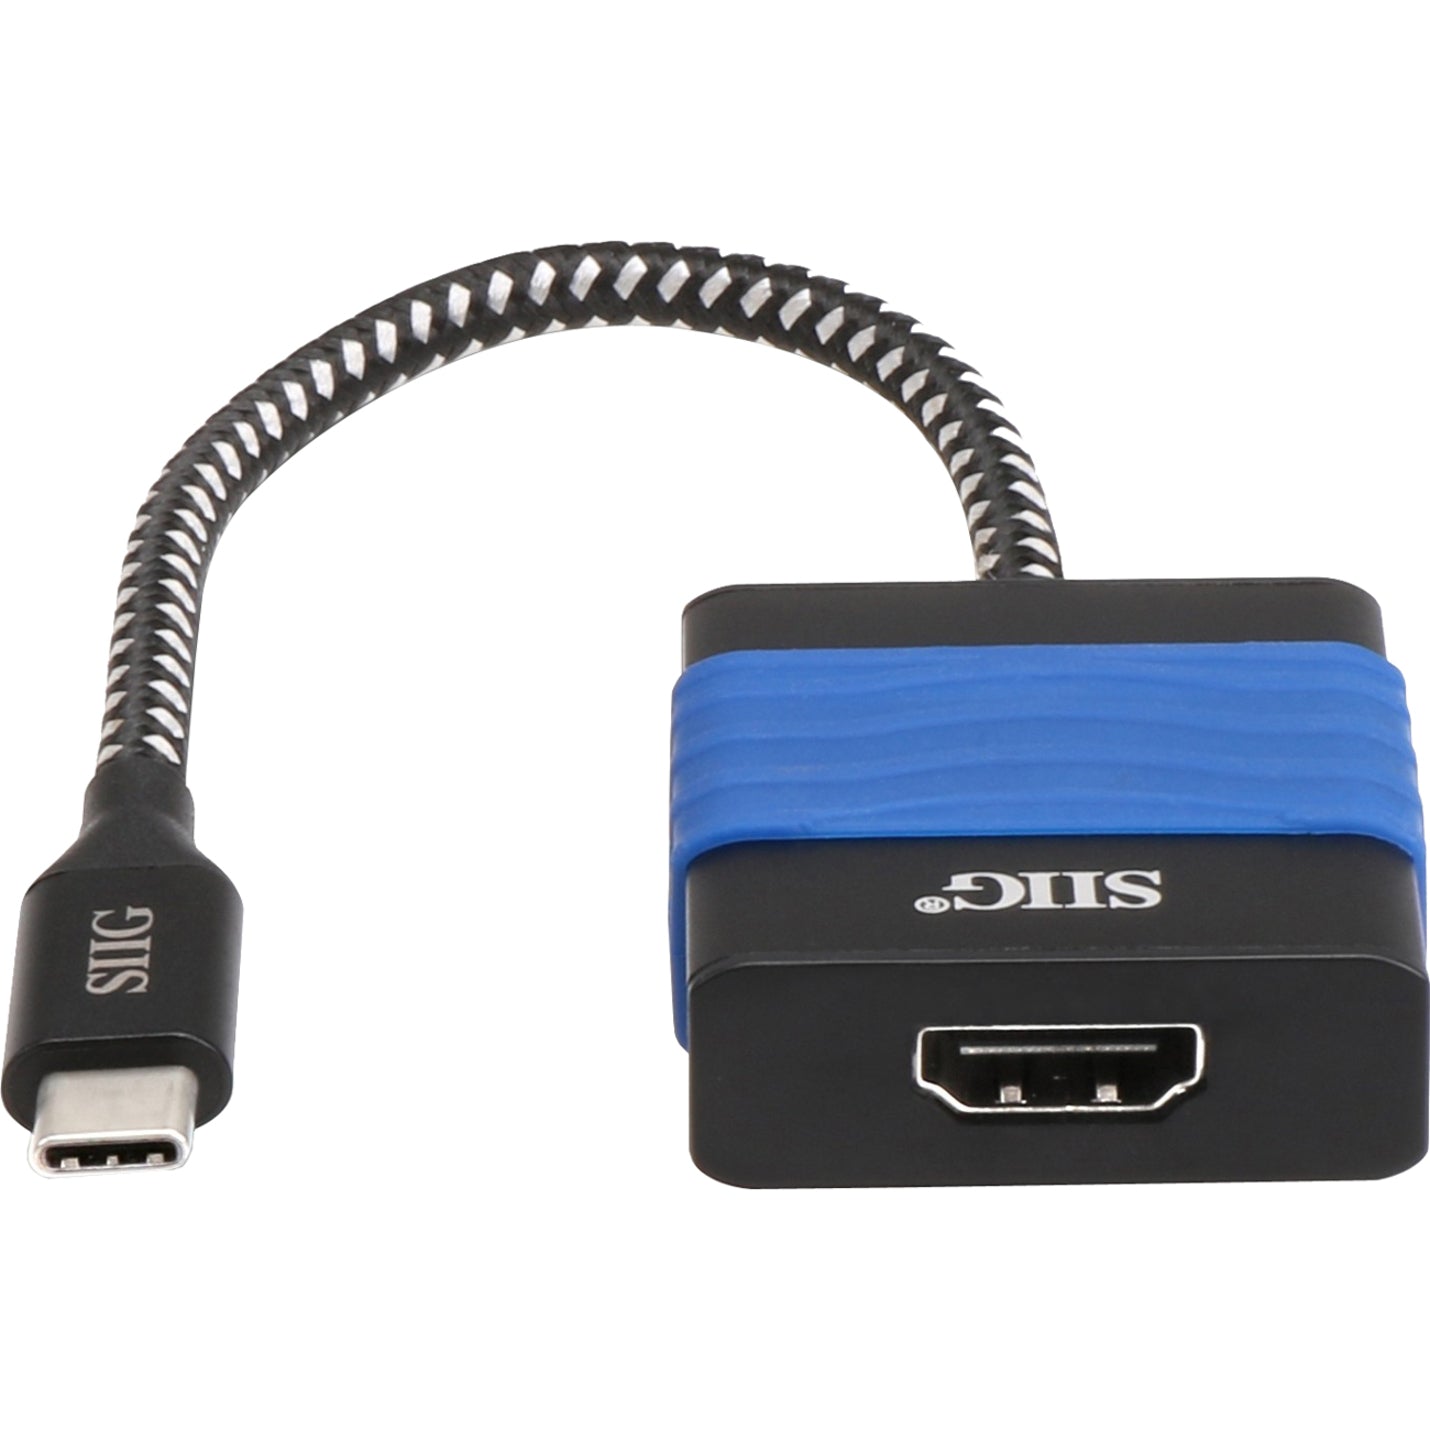 SIIG CB-TC0014-S2 USB Type-C to HDMI Cable Adapter - 4Kx2K, Connect Your PC to a 4K Display